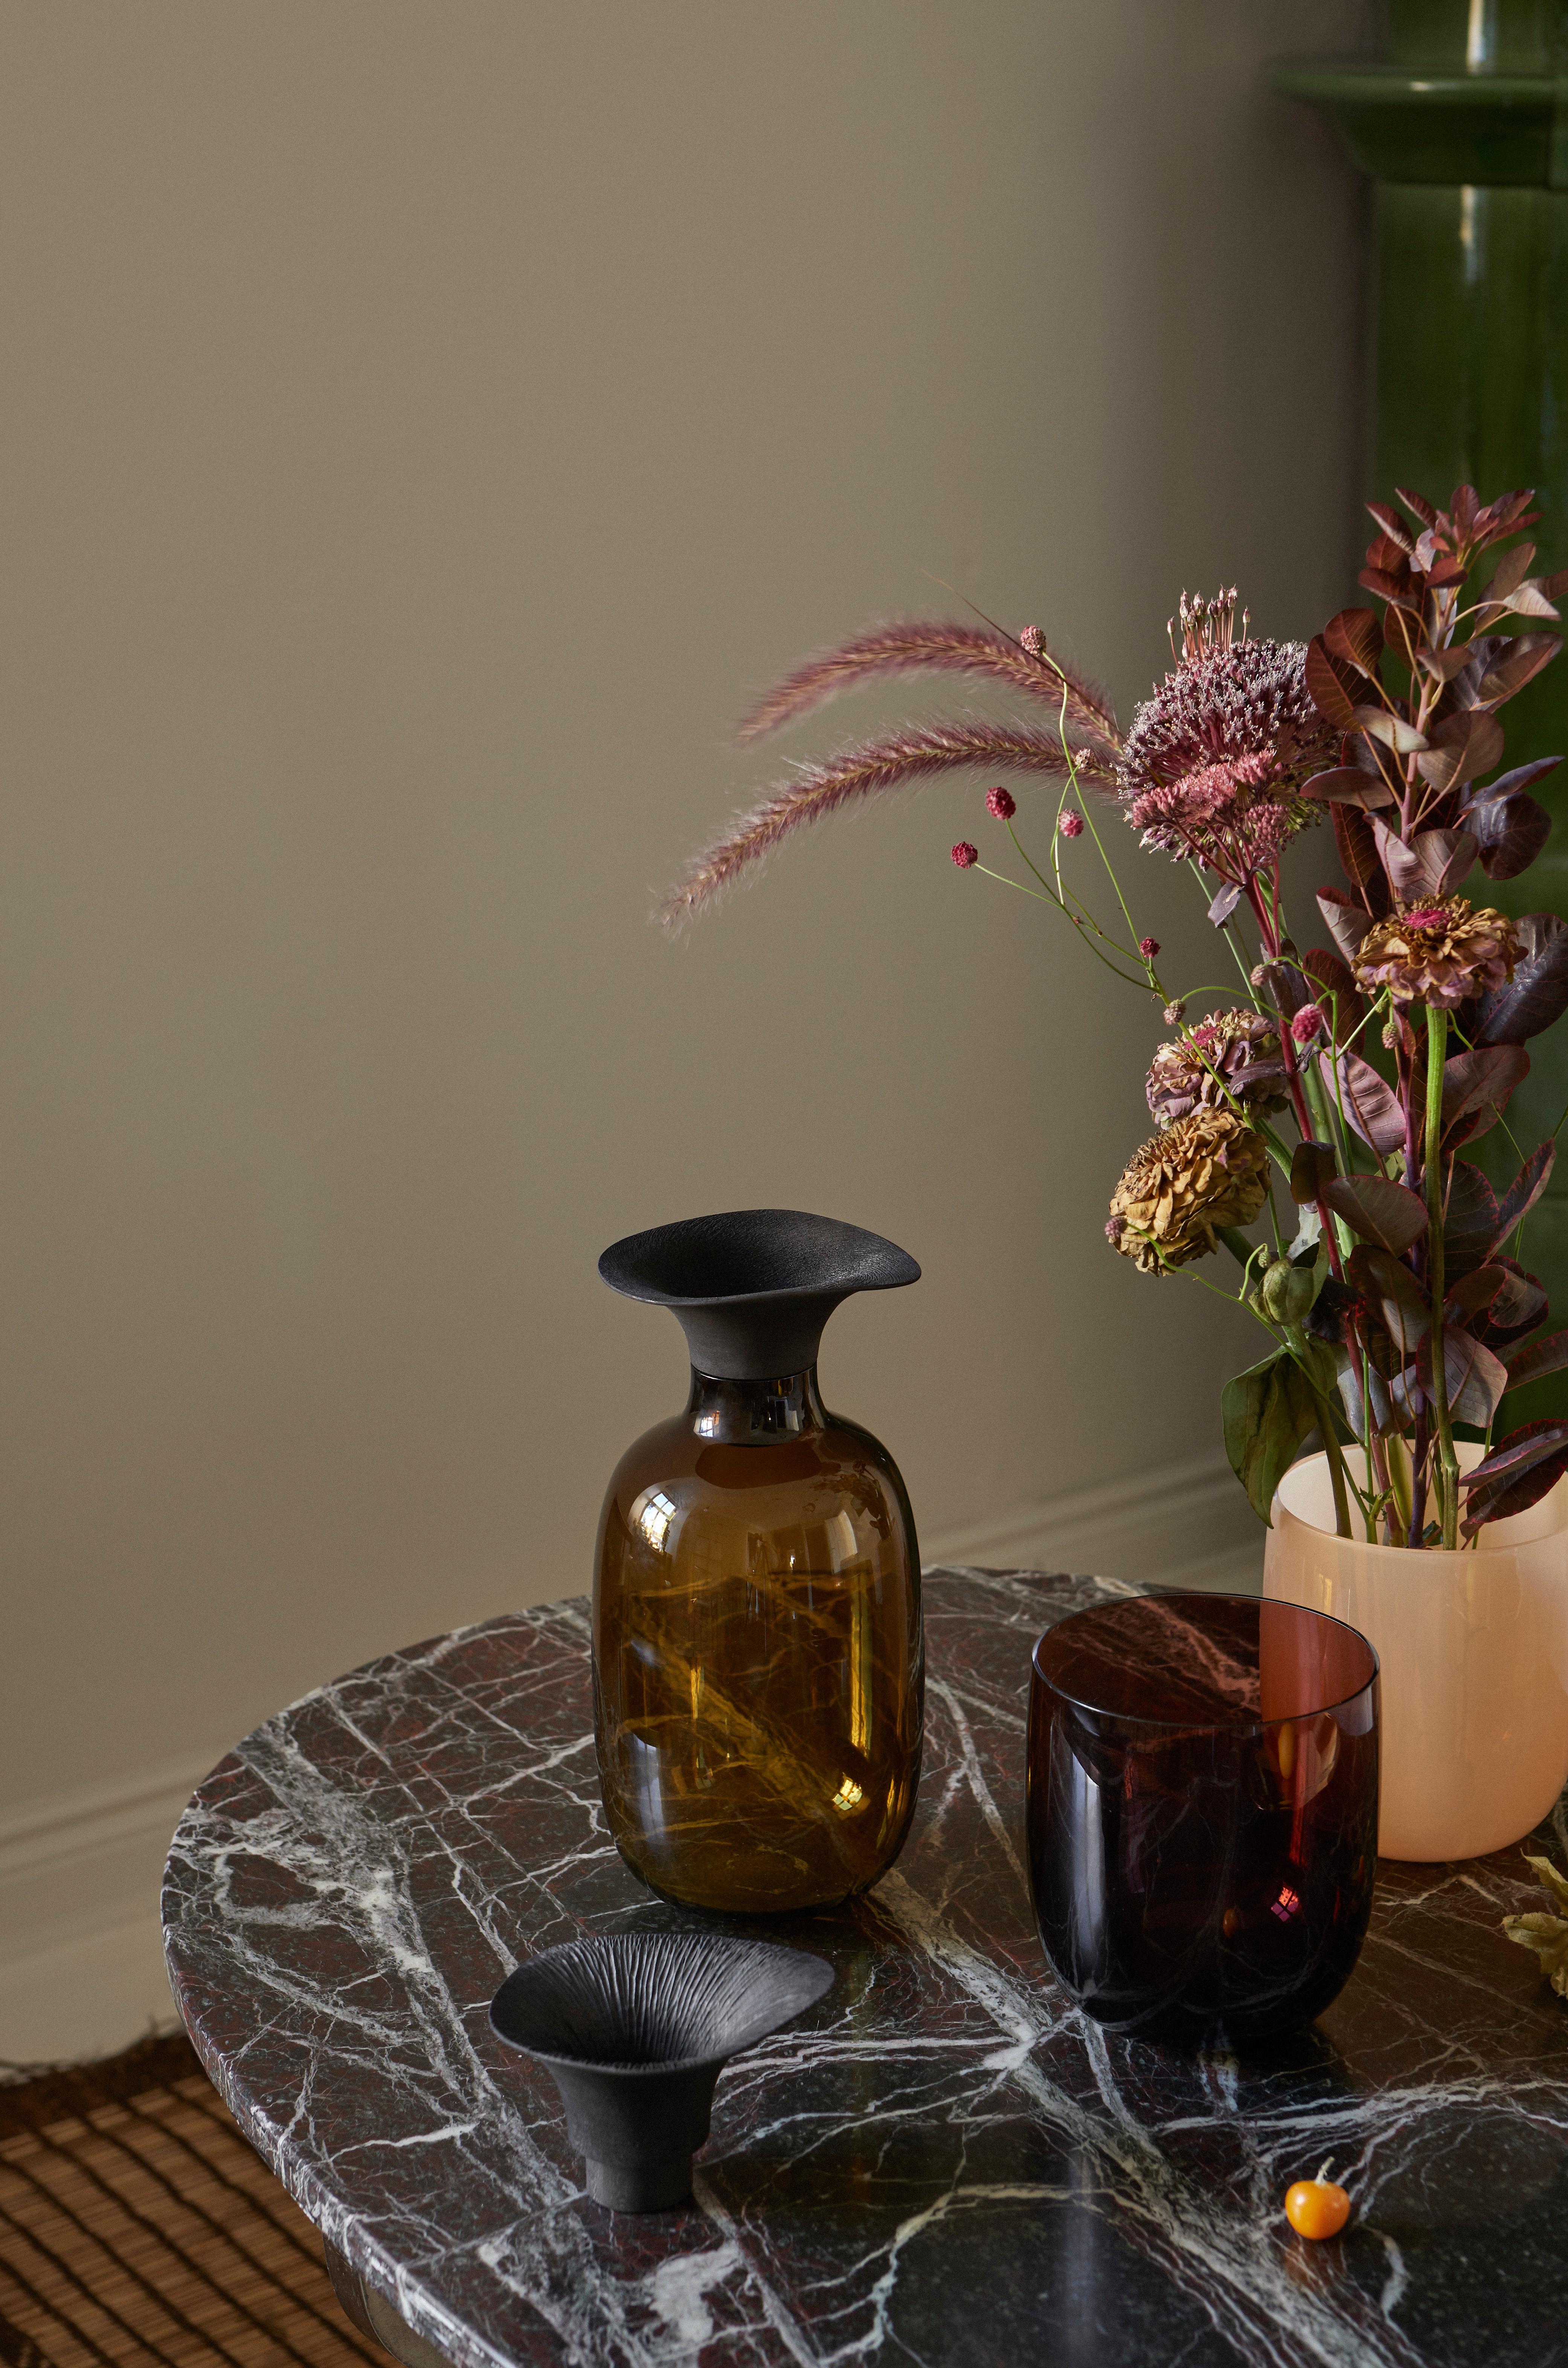 Combining hard glass with warm wood, the Vieno bottle is designed to combine harmoniously with floral arrangements. Vieno is like smooth, calm water: it gives life to flowers and branches that are given to it, letting them reach out towards new